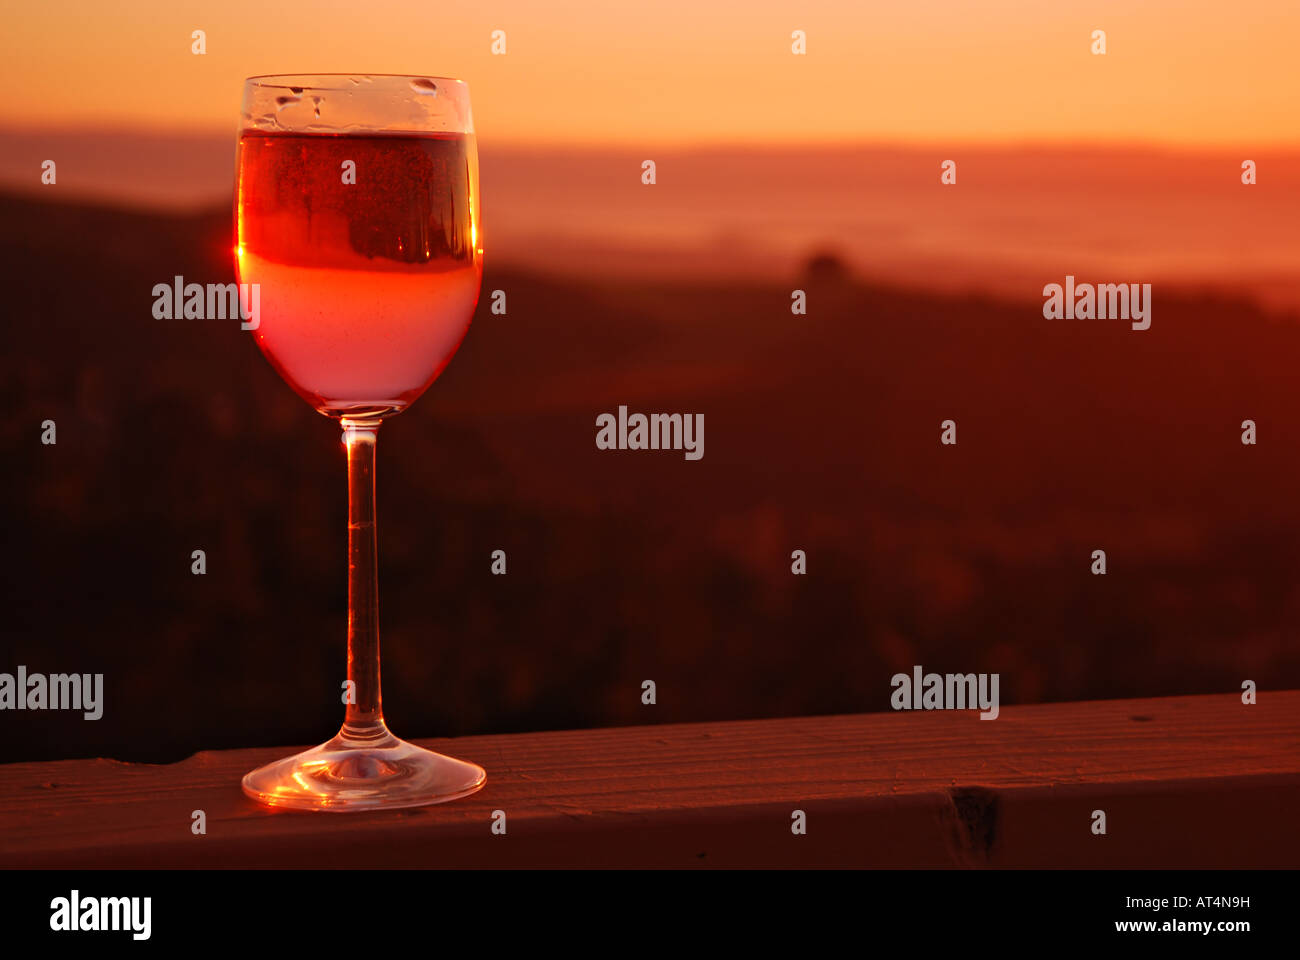 Glass of rose wine on wooden rail at sunset Stock Photo